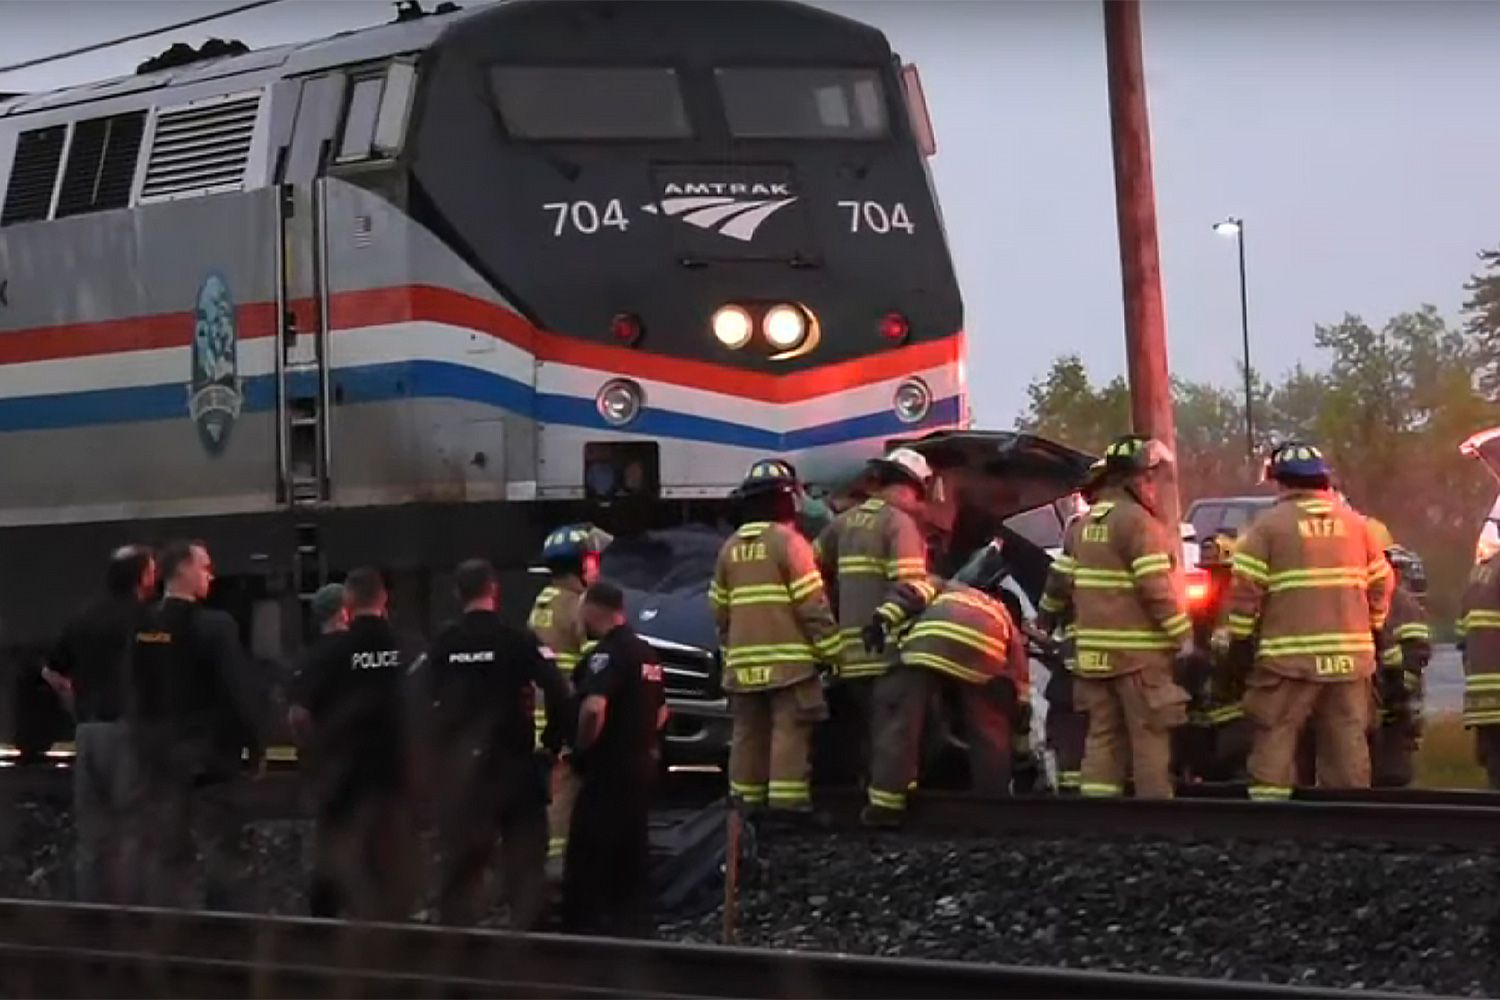 3 People Dead, Including a Child, After Amtrak Train Hits Truck in N.Y. [Video]